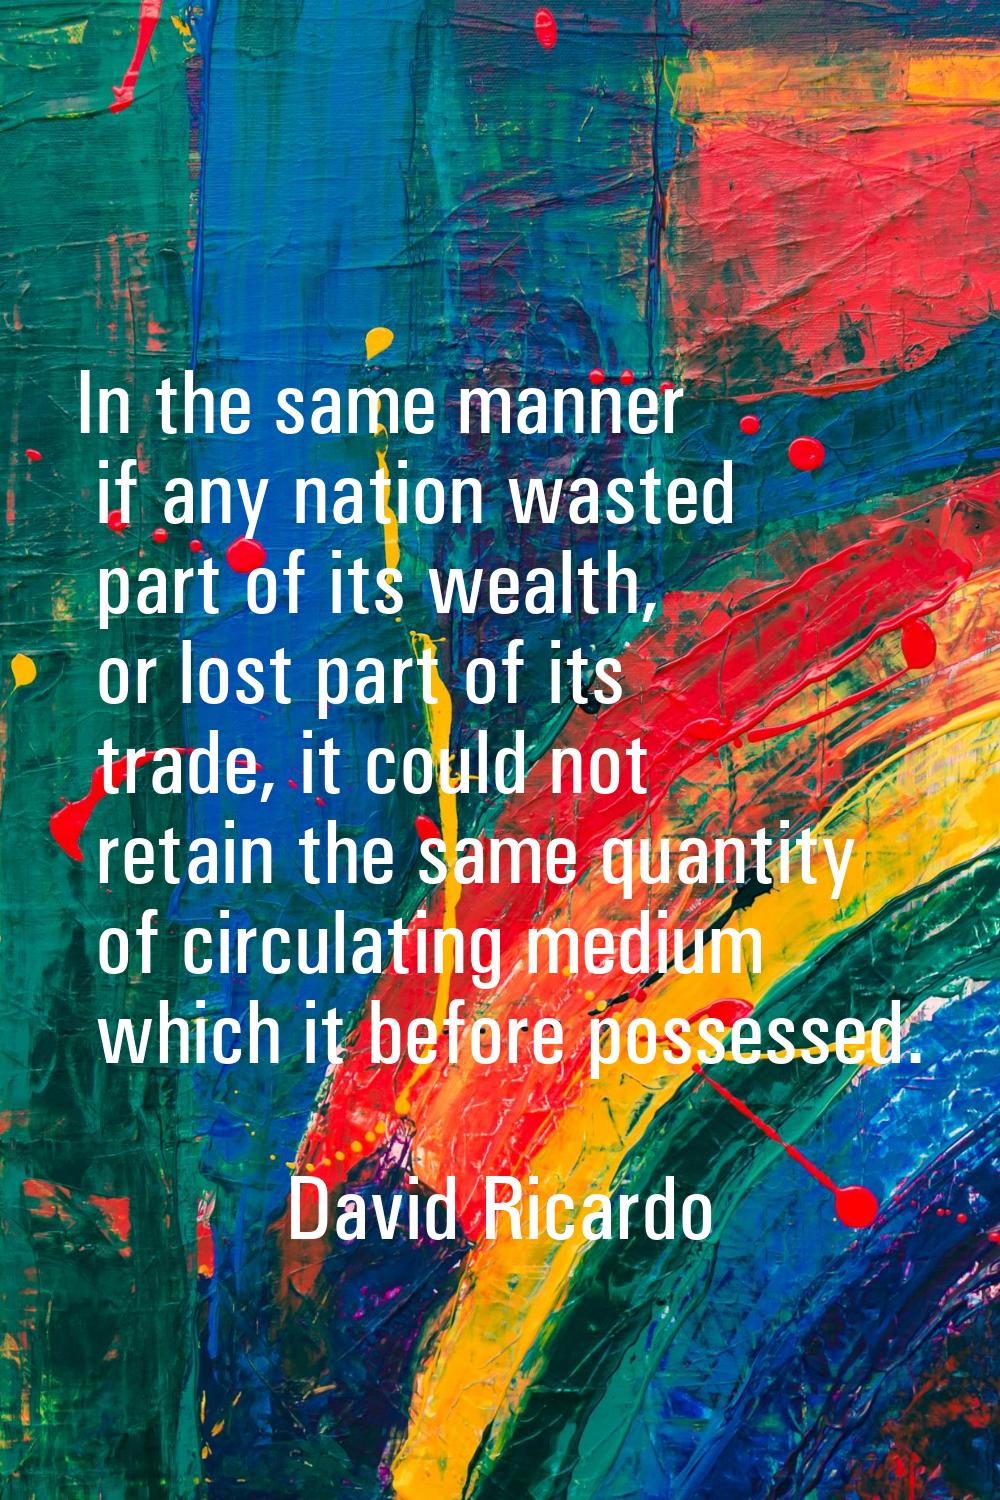 In the same manner if any nation wasted part of its wealth, or lost part of its trade, it could not